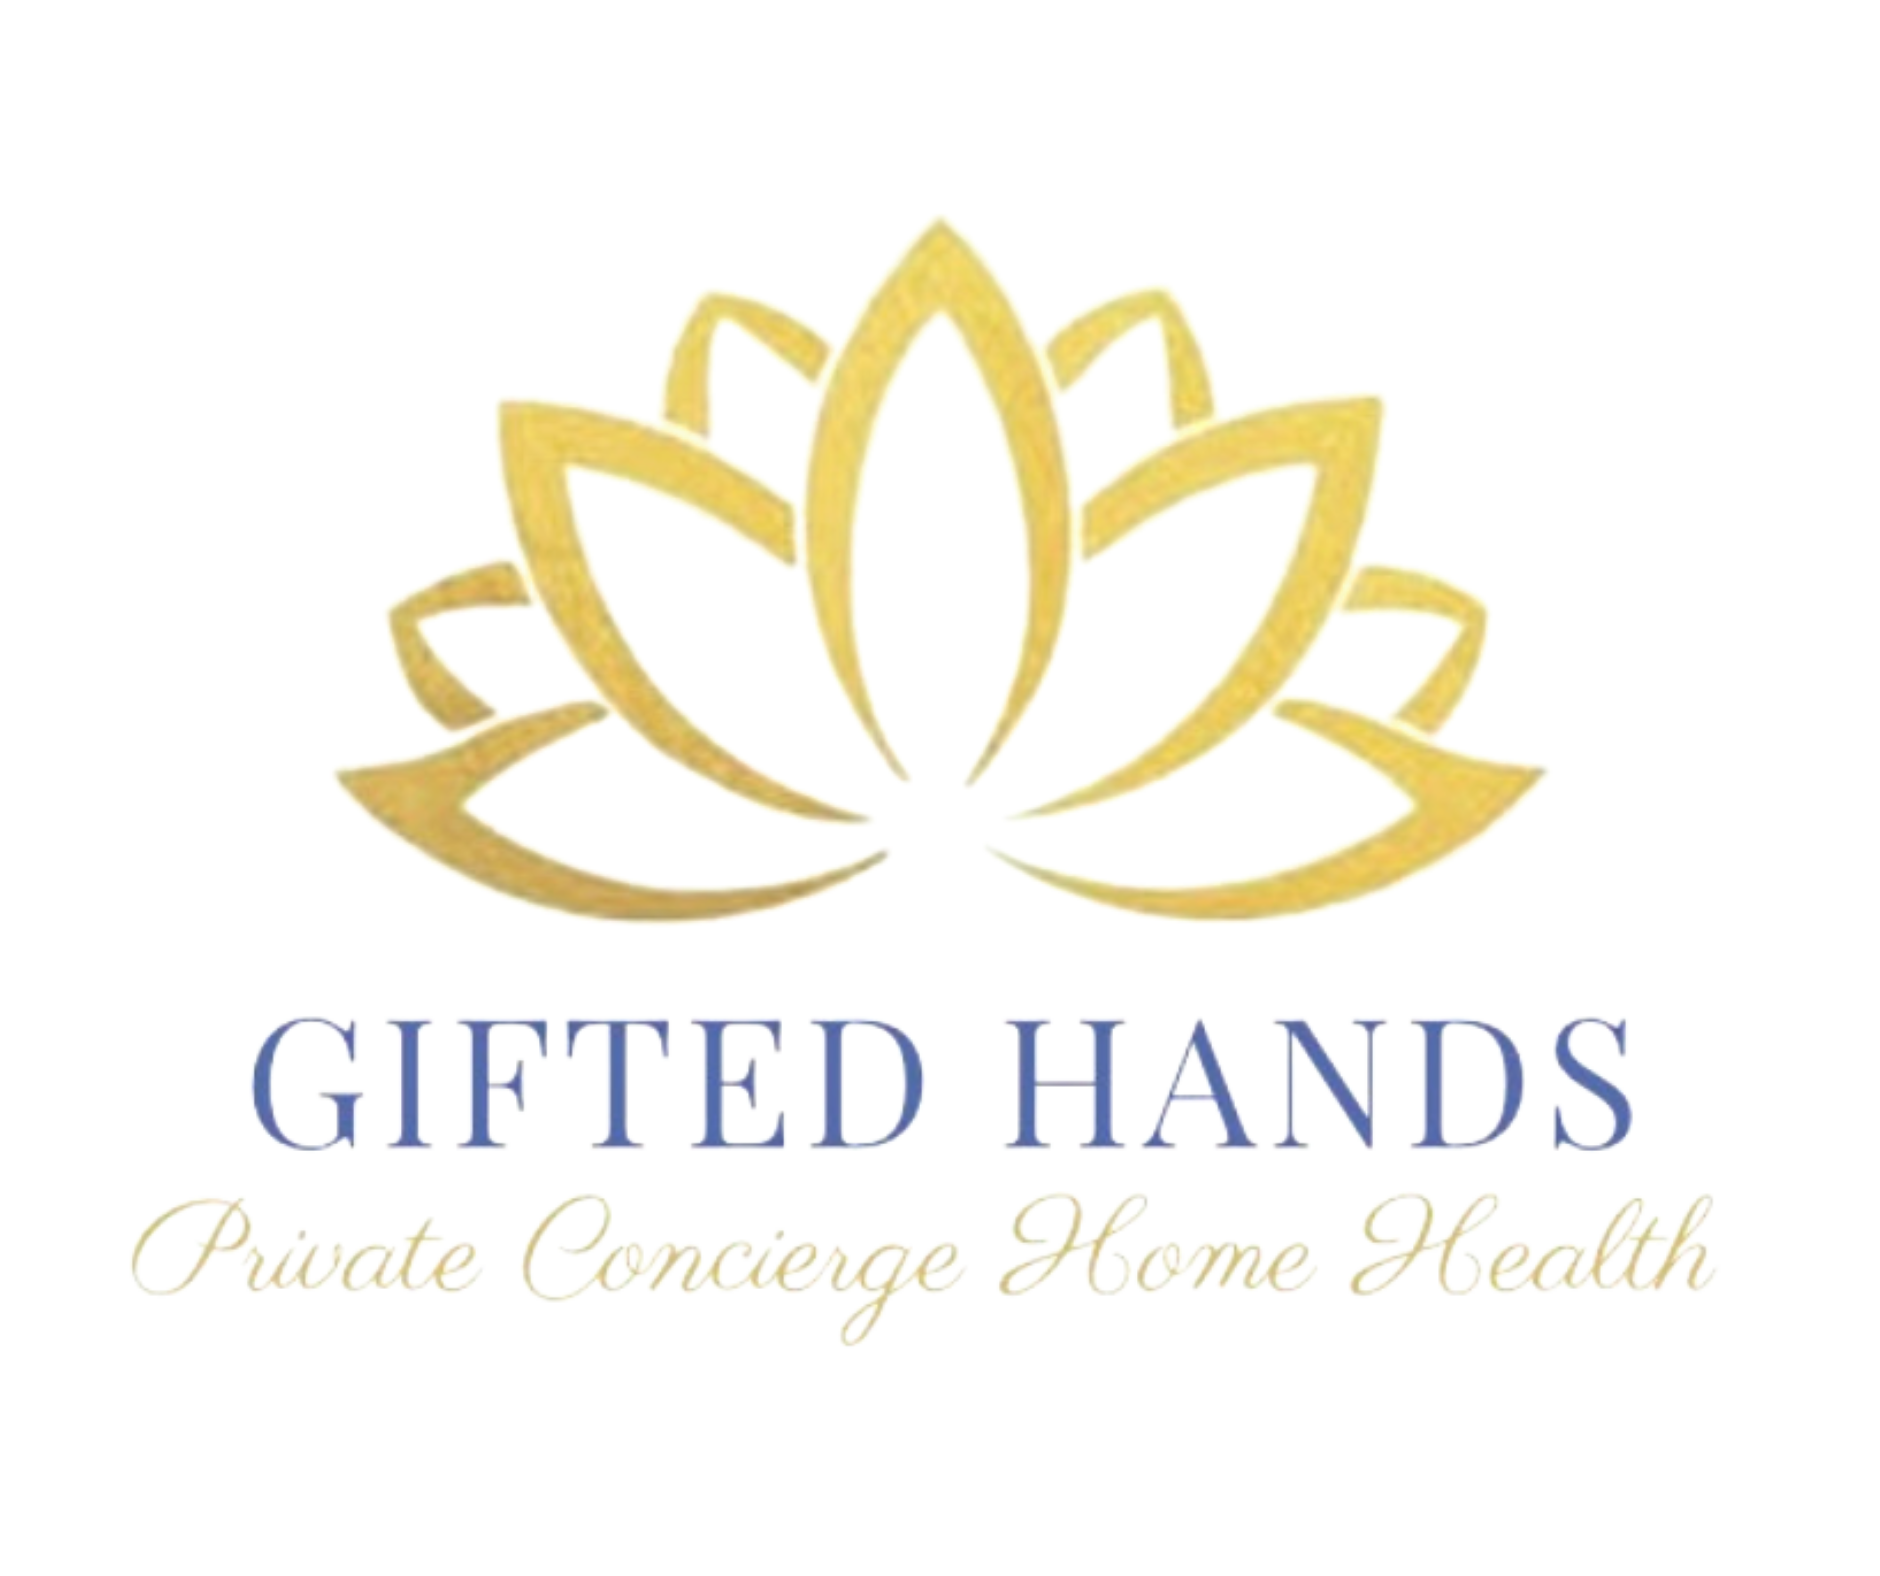 gifted-hands-concierge’s-home-health.